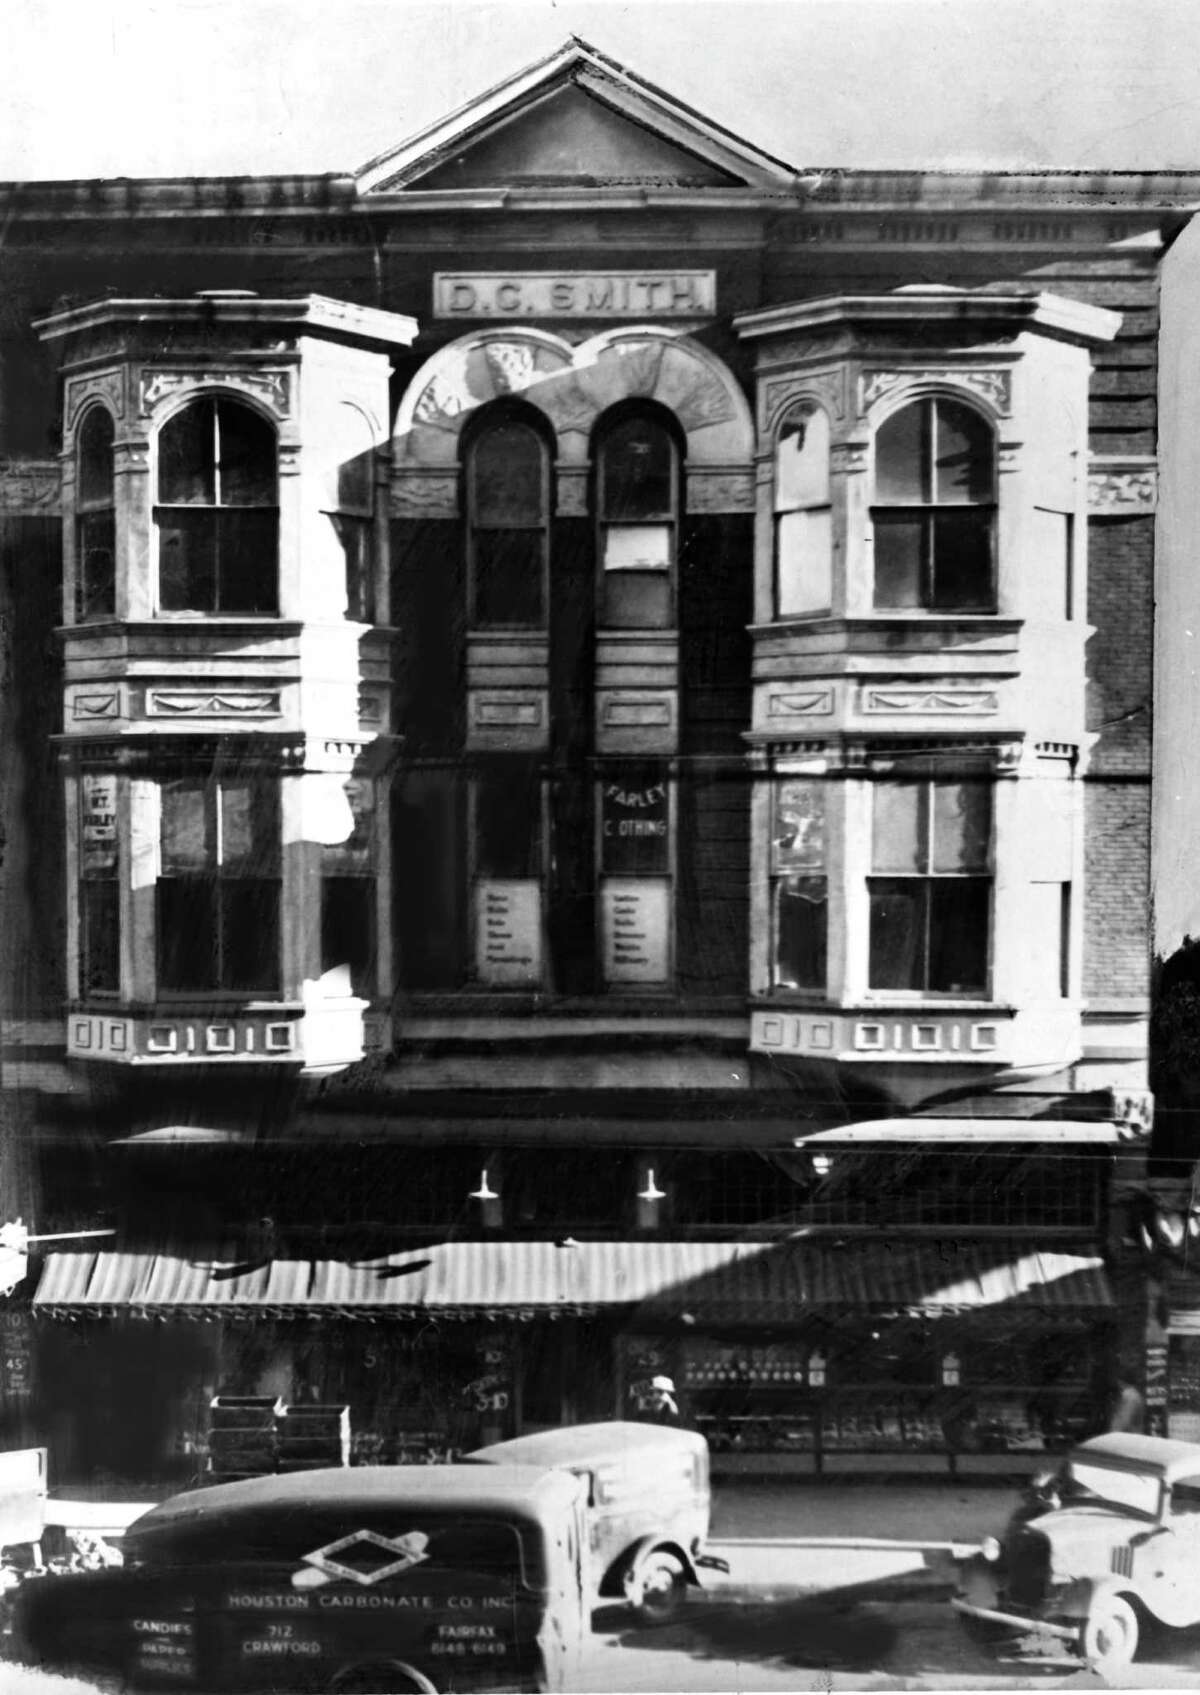 The Chronicle was first published Oct. 14, 1901, in the three-story D.C. Smith Building, at 1009 Texas Ave., between Main and Fannin. The rent was a steep $250 a month, but the paper's founders recovered the cost by subletting two-thirds of the building. After eight years, the growing Chronicle had to move out. In 1936, the building was destroyed by fire. The Binz Building later occupied the site.